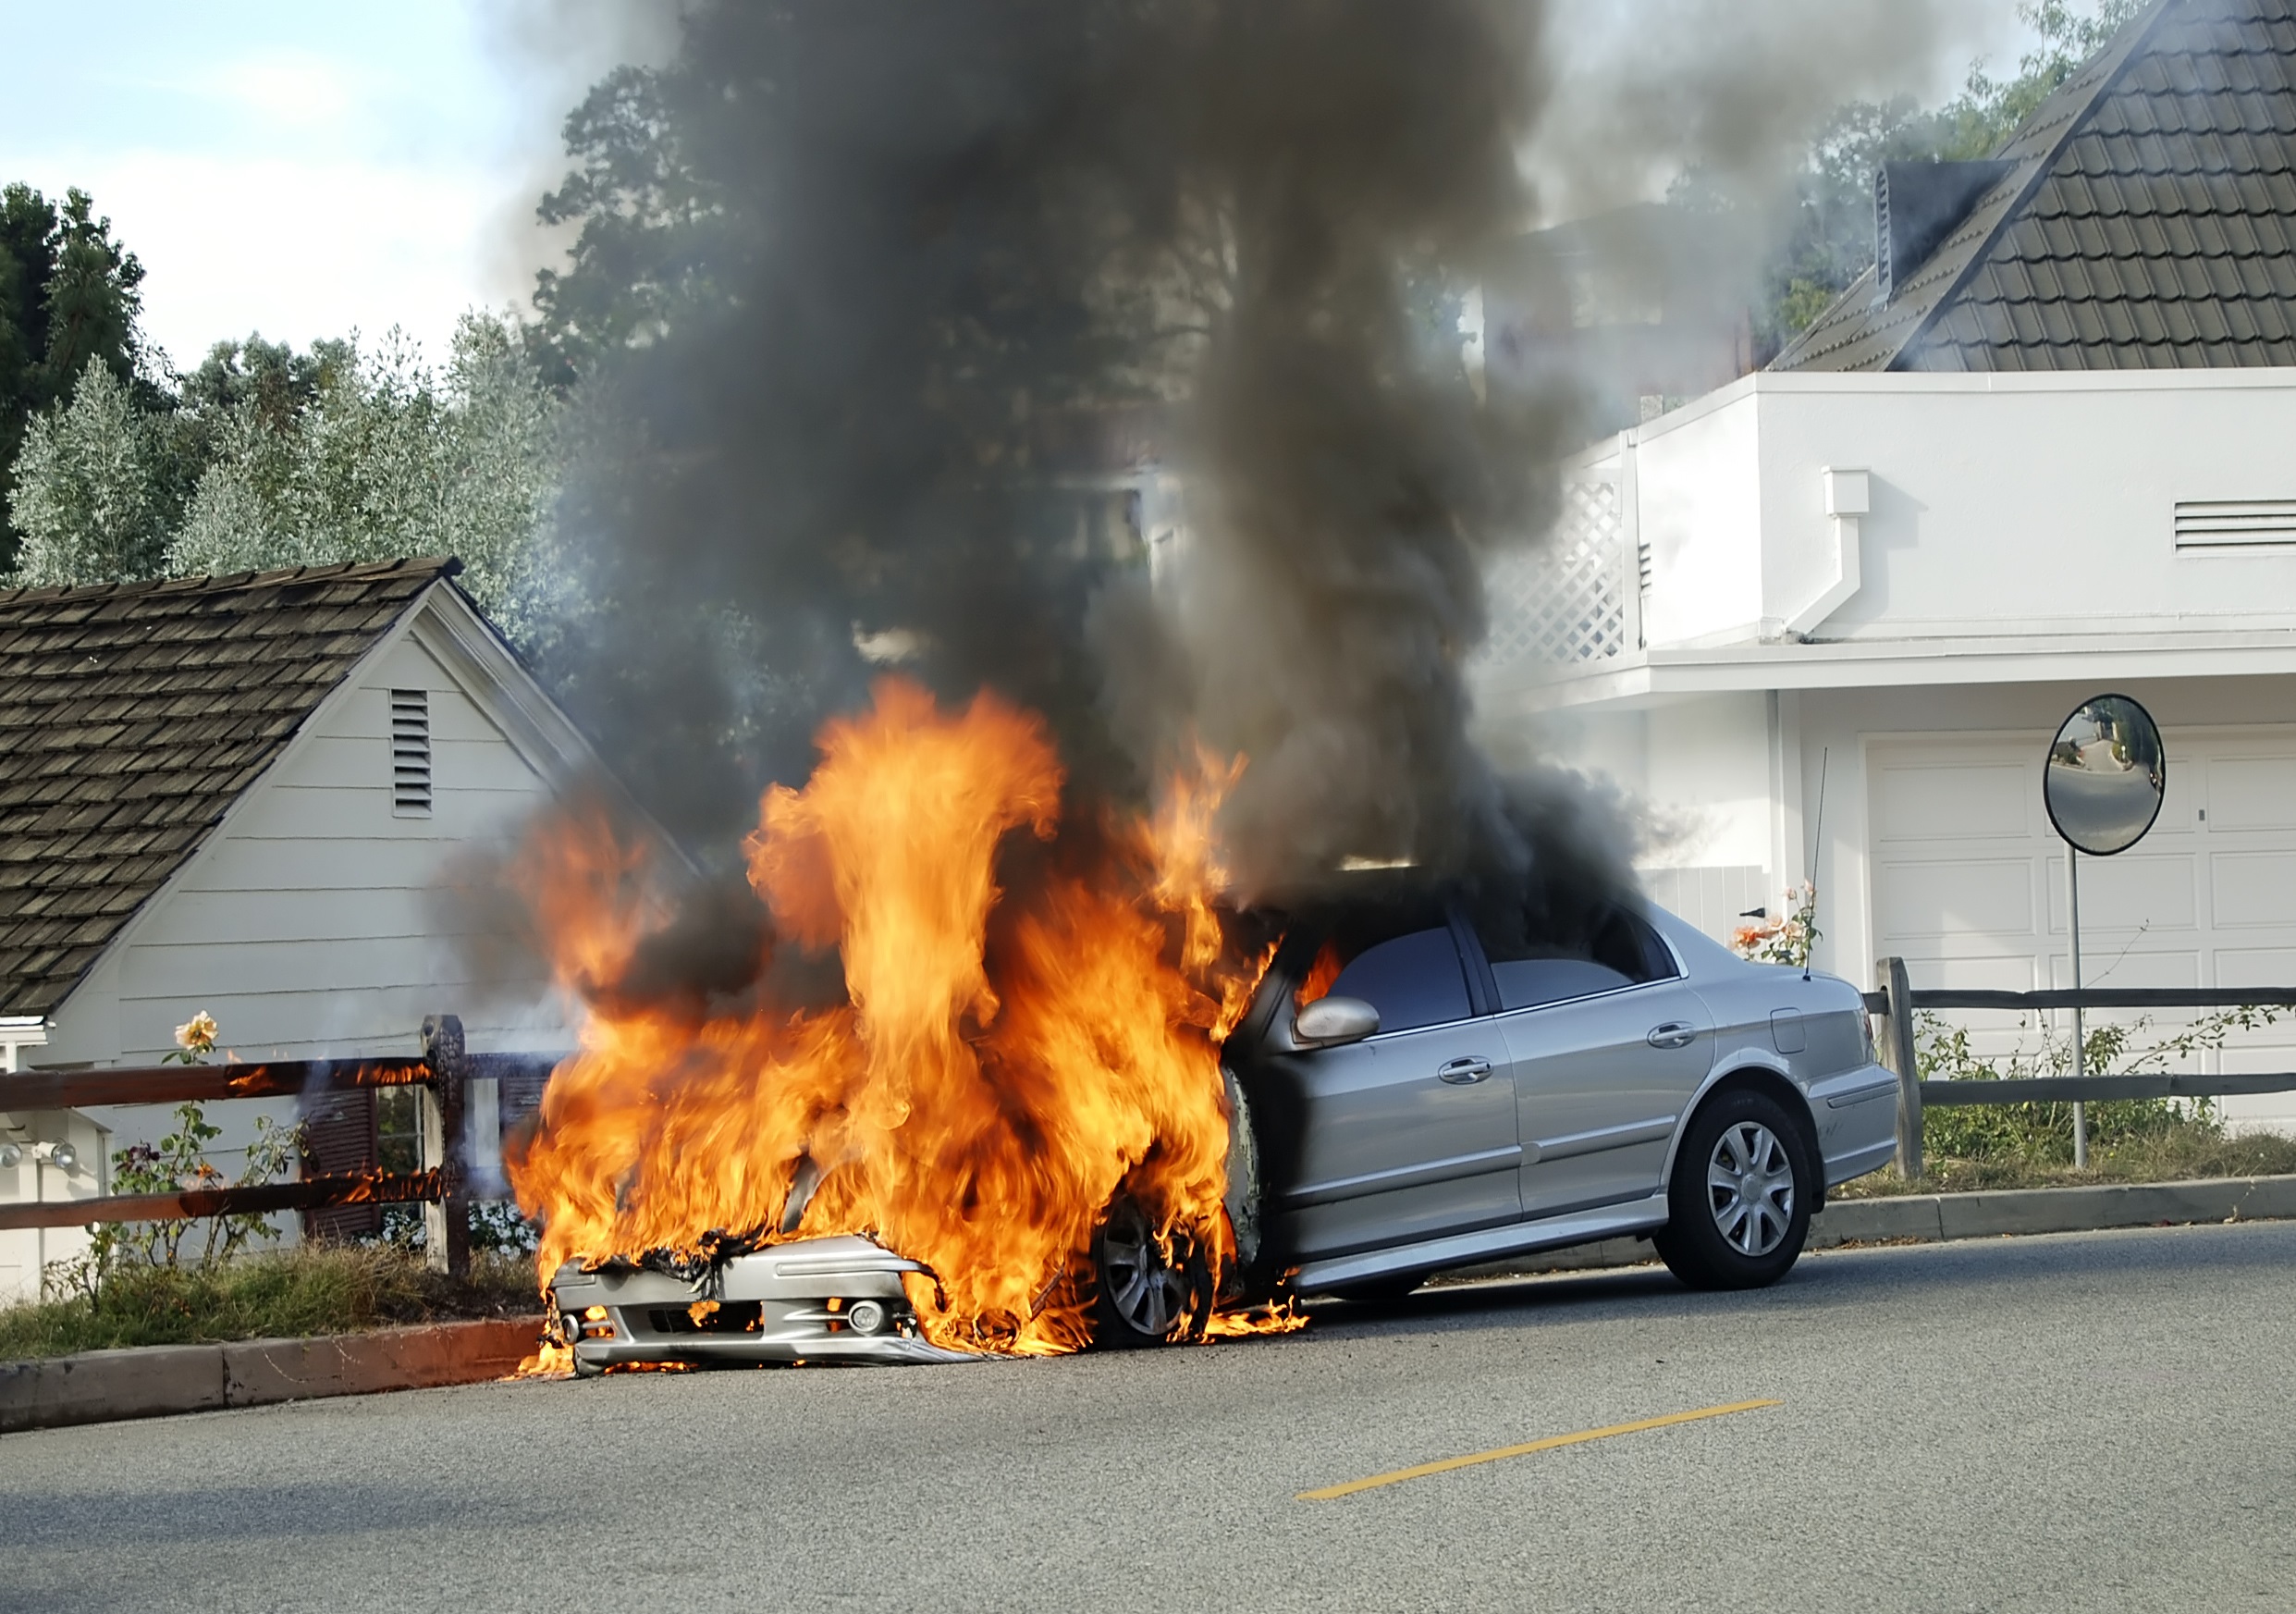 CAR ON FIRE IN FRONT OF HOME